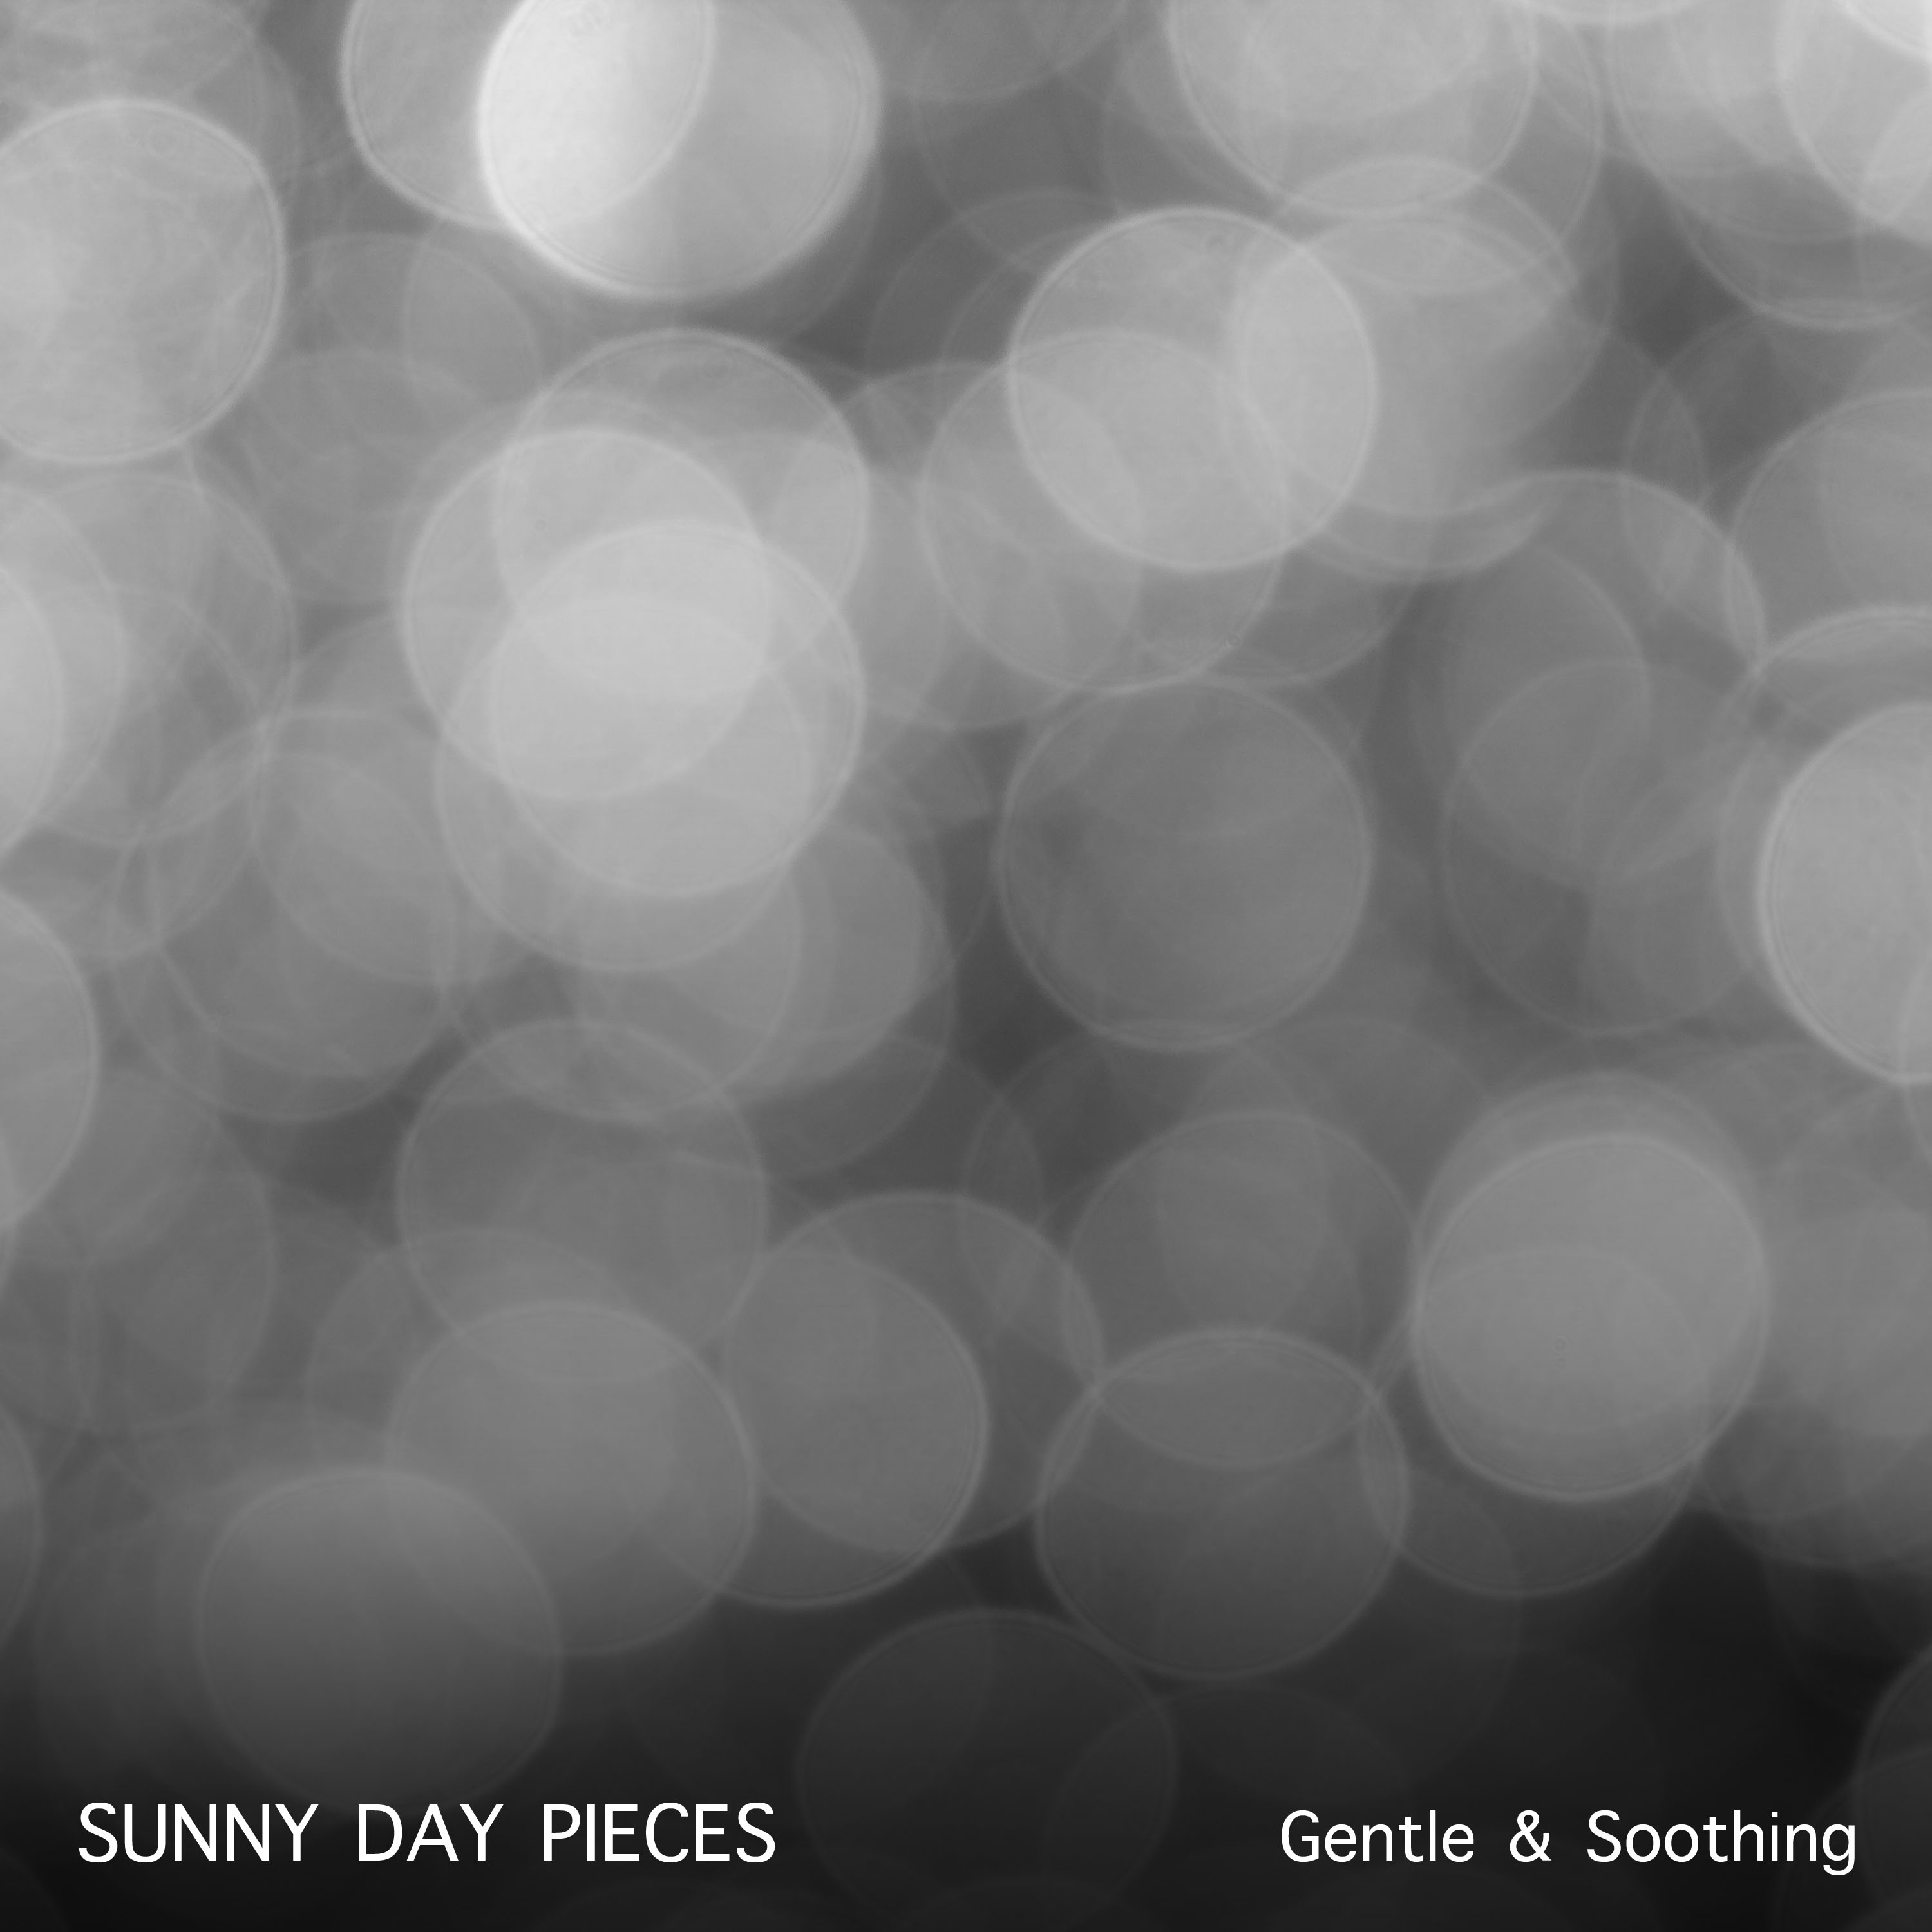 14 Sunny Day Relaxing Pieces - Gentle and Soothing